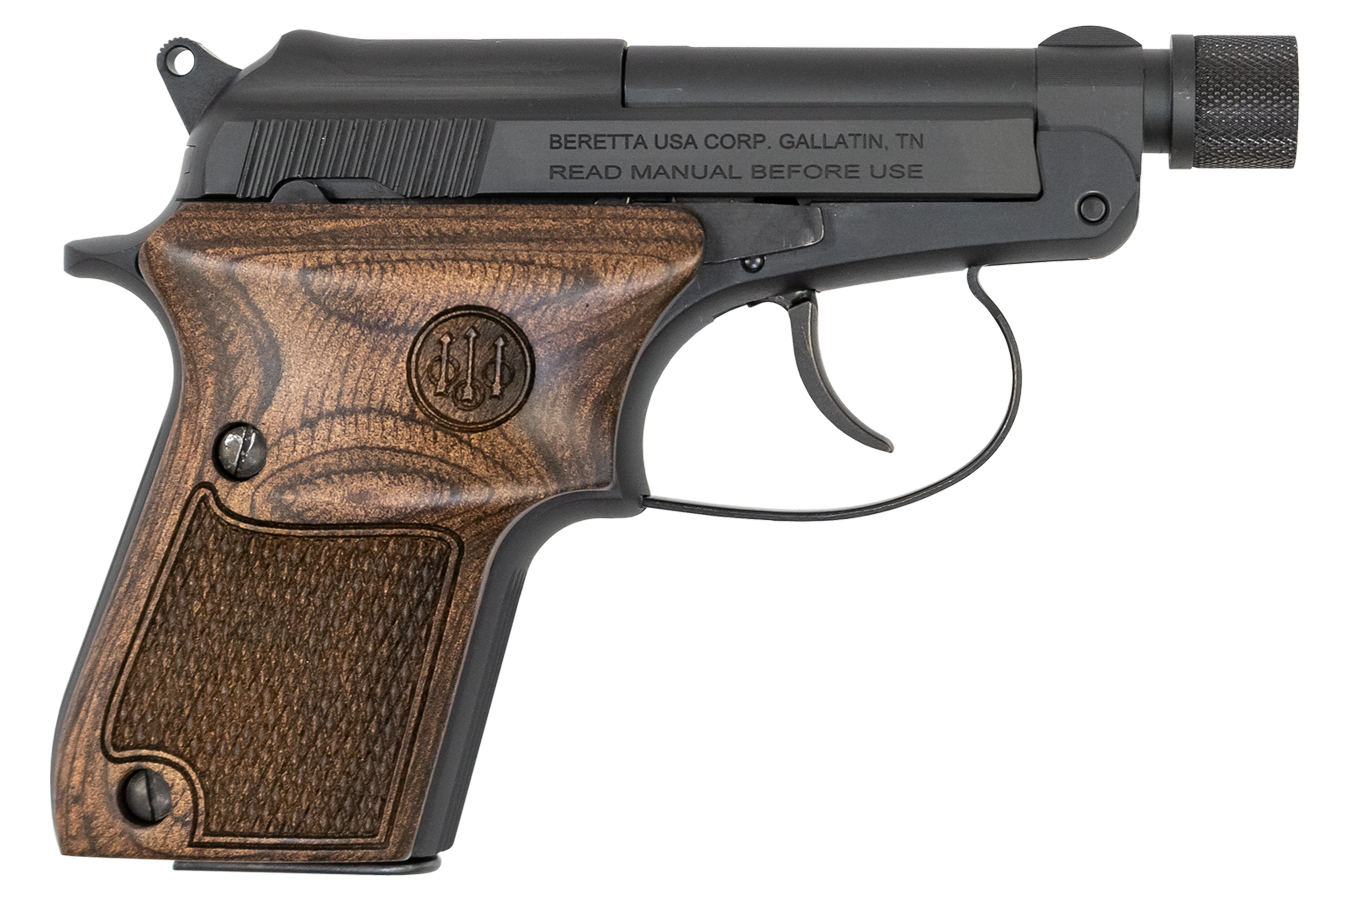 BOBCAT 22 LR PISTOL WITH WOOD GRIPS AND THREADED BARREL